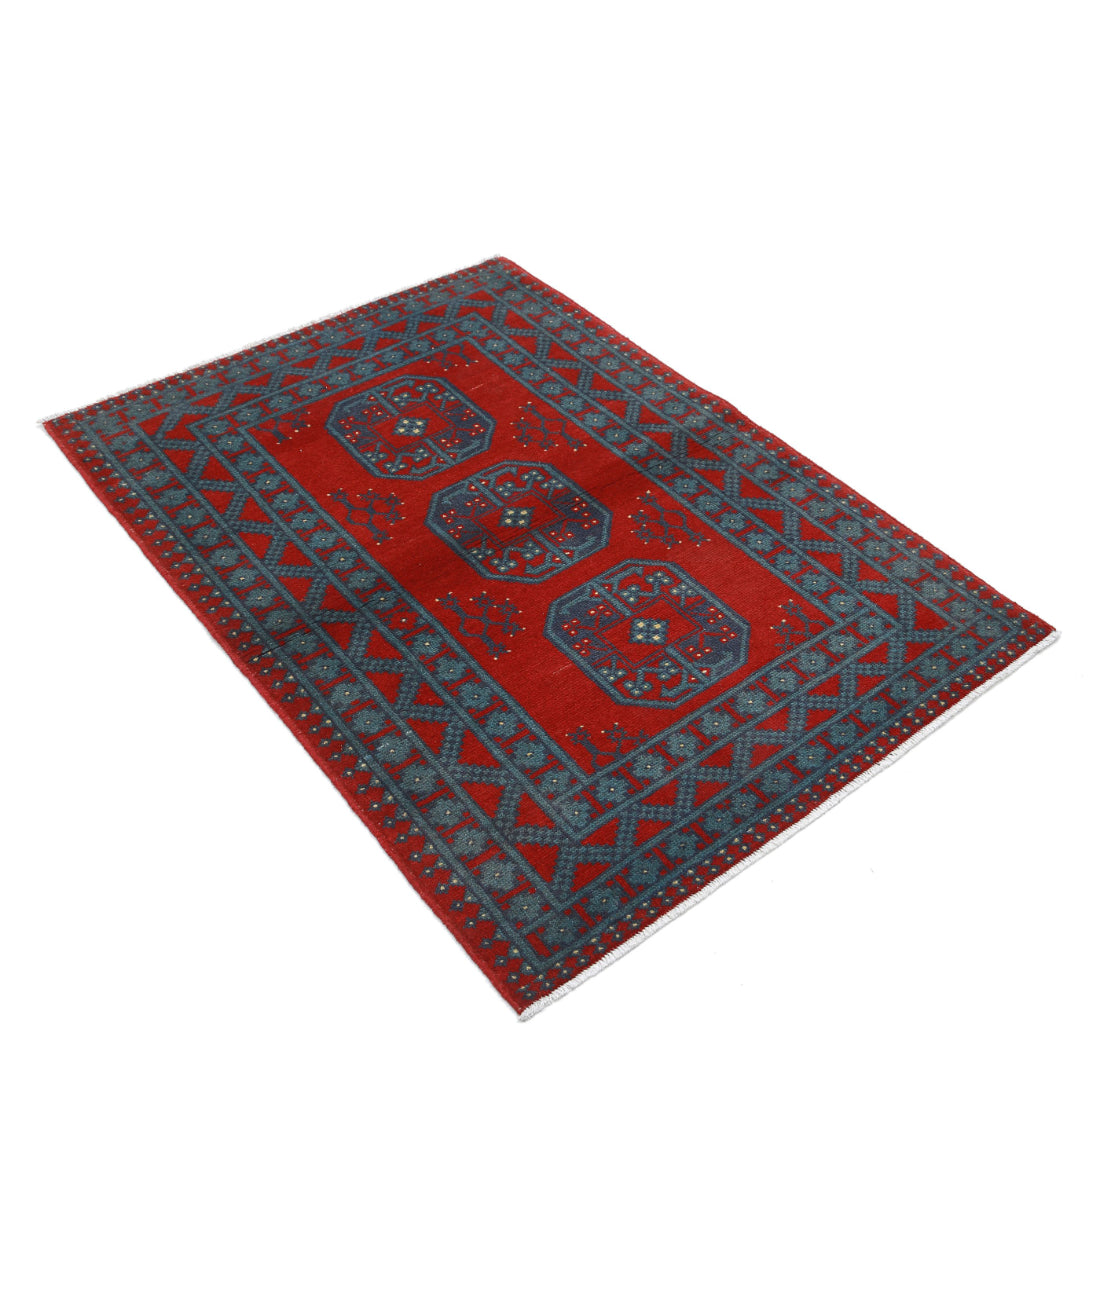 Revival 3'6'' X 4'9'' Hand-Knotted Wool Rug 3'6'' x 4'9'' (105 X 143) / Red / Green